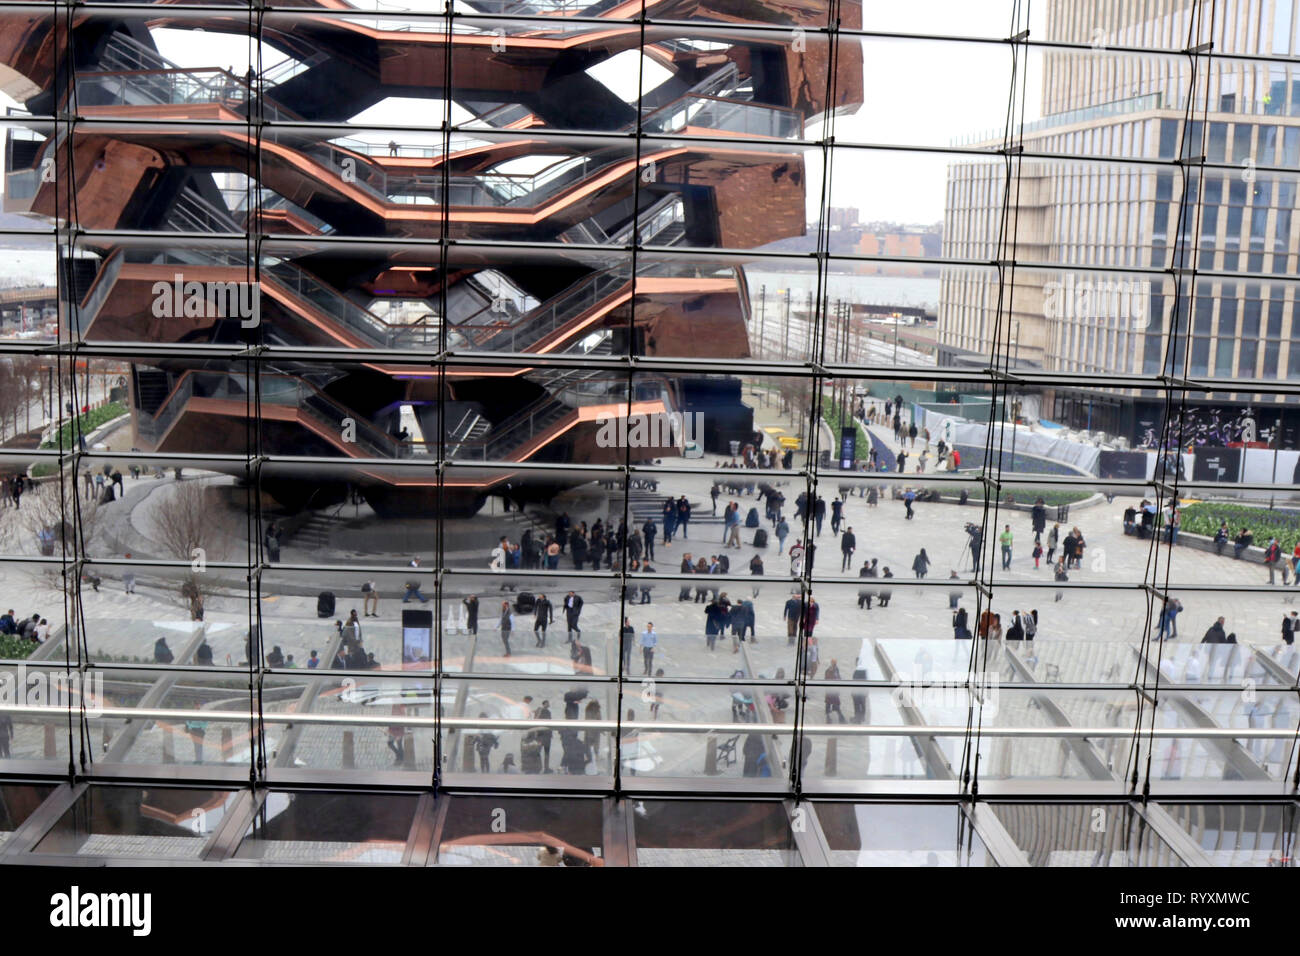 March 15, 2019 - New York City, New York, US - Hudson Yards, the largest private real estate development in American history opened to the public March 15, 2019 on the west-side of midtown Manhattan. The  $25 billion community rising above a working rail yard,  became an instant hit with its 4,000 residential apartments, 100 shops, office space, apartments, a public school and arts space â€“- featuring ''The Vessel'', a climbable sculpture made up of nearly 155 flights of stairs arranged into a honeycomb shape in the plaza. (Credit Image: © G. Ronald Lopez/ZUMA Wire) Stock Photo